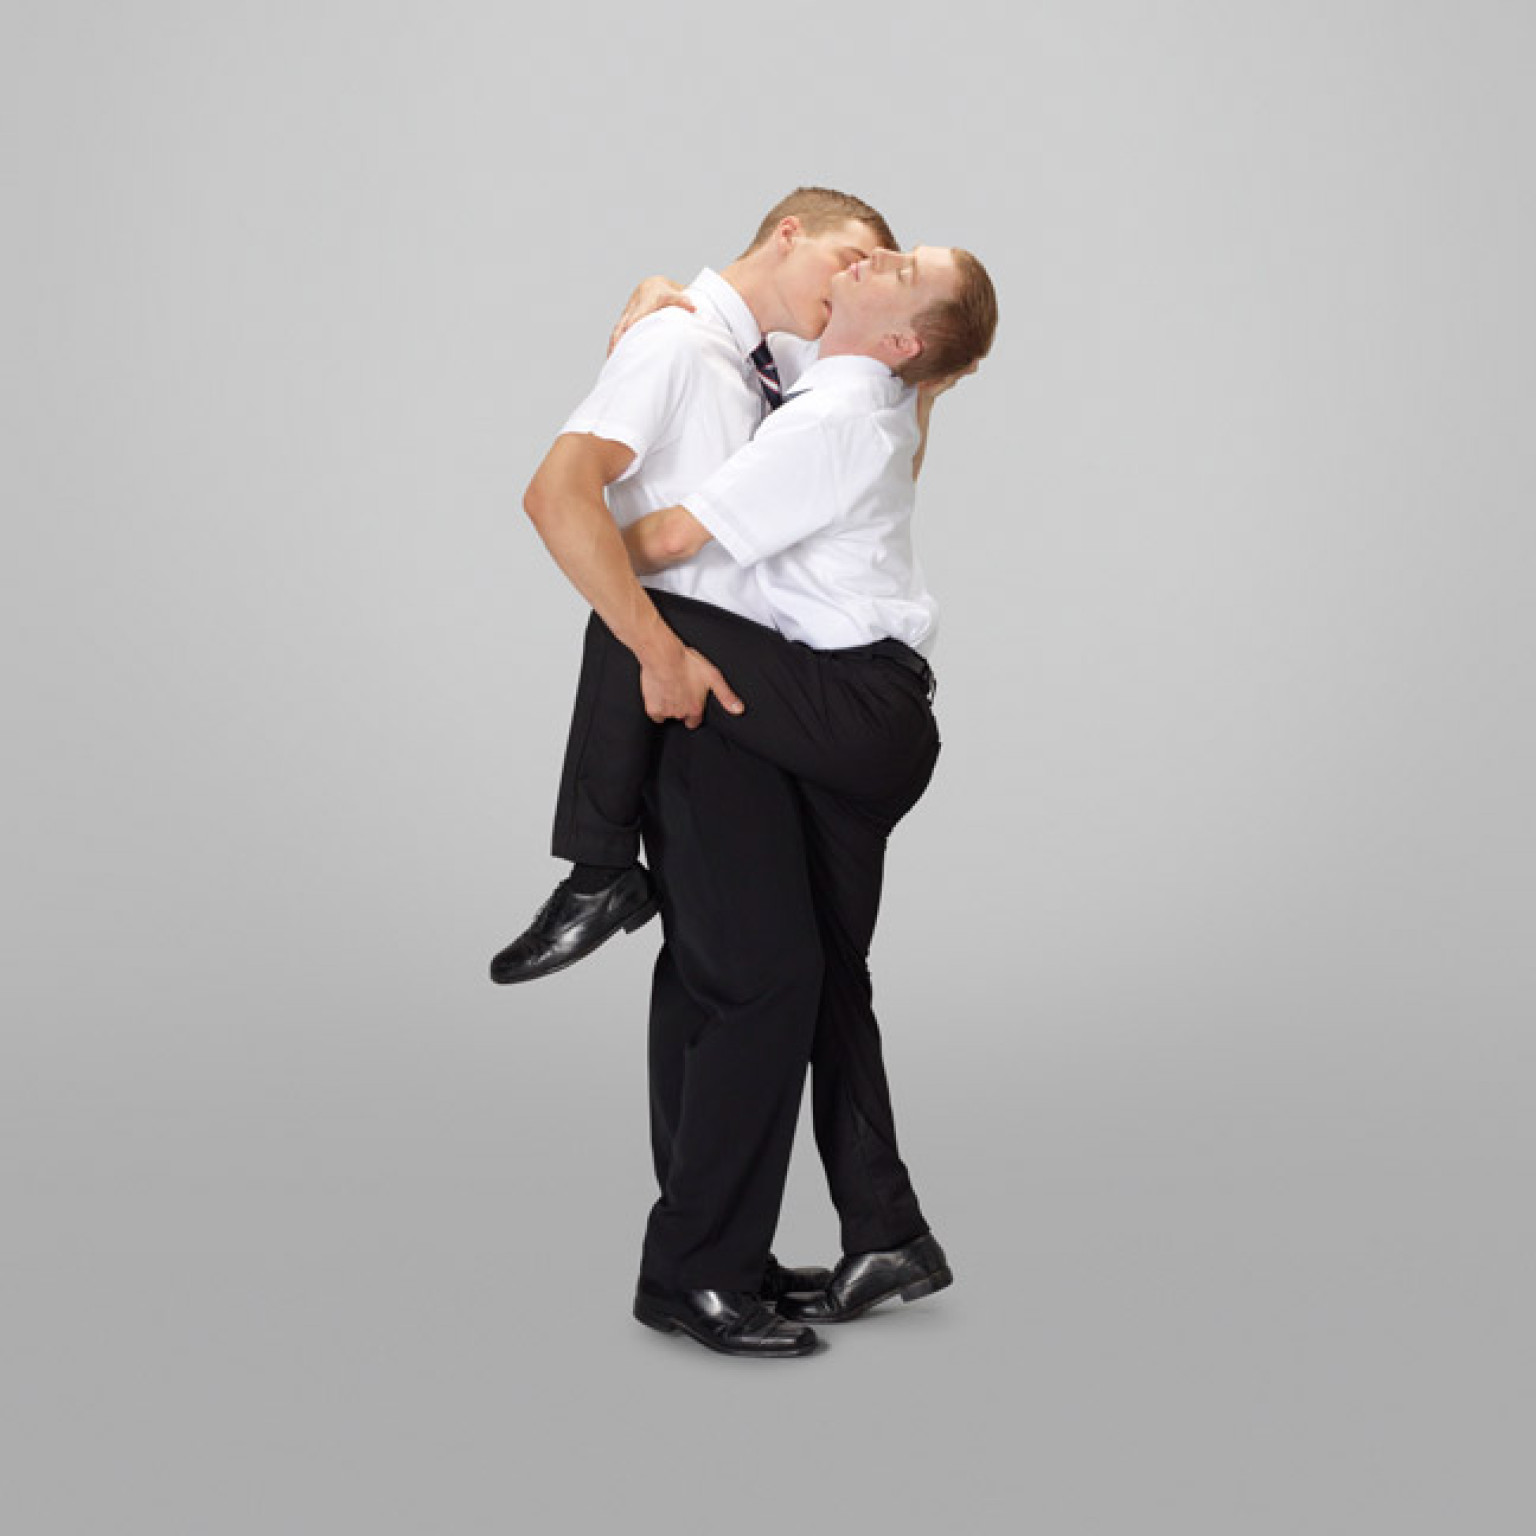 The Book Of Mormon Missionary Positions Shows Forbidden